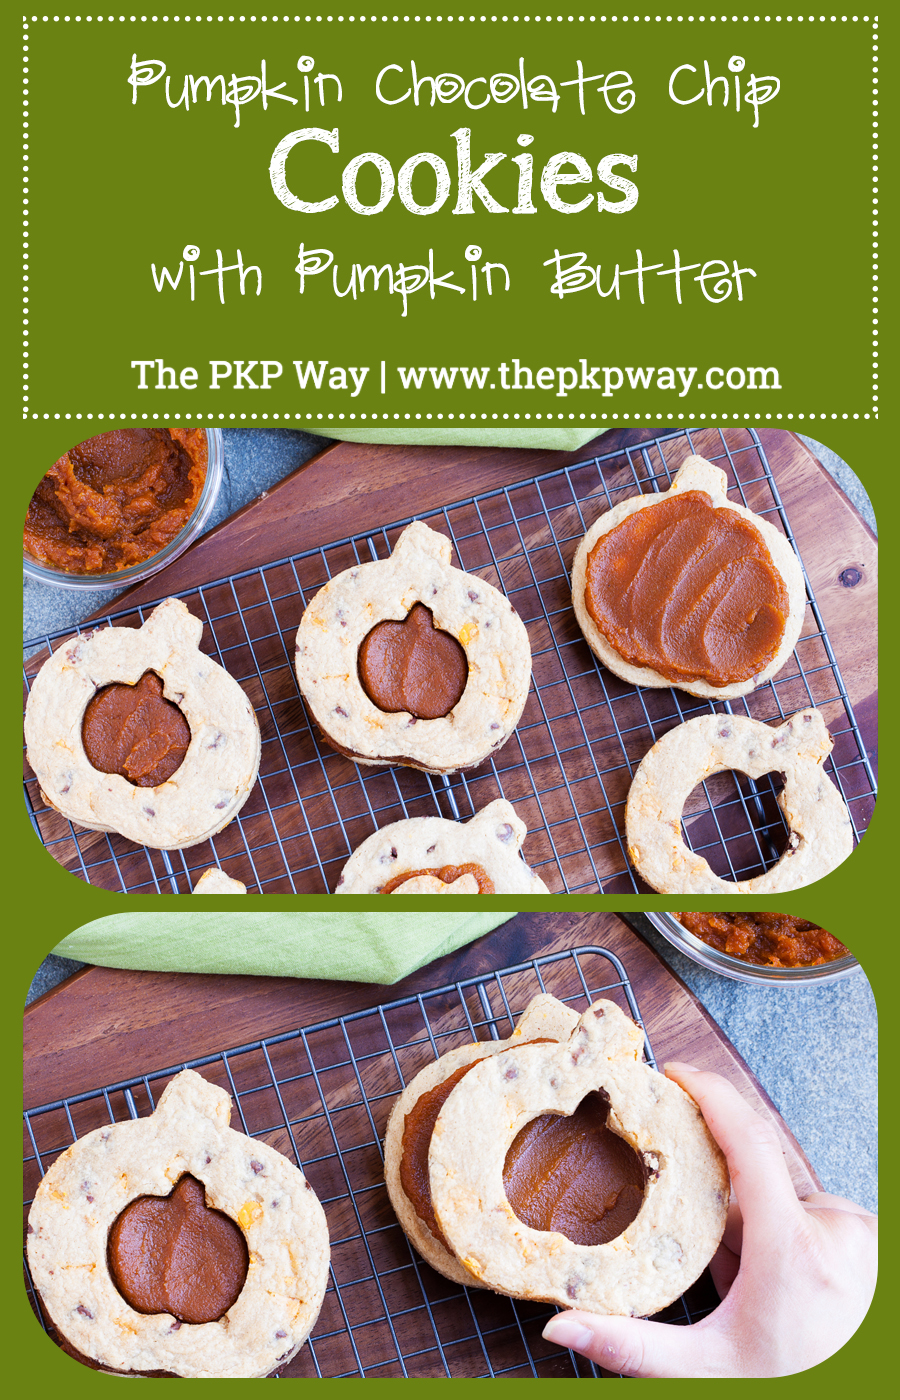 Begin cookie decorating season early with these Pumpkin Chocolate Chip Cookies with Pumpkin Butter.